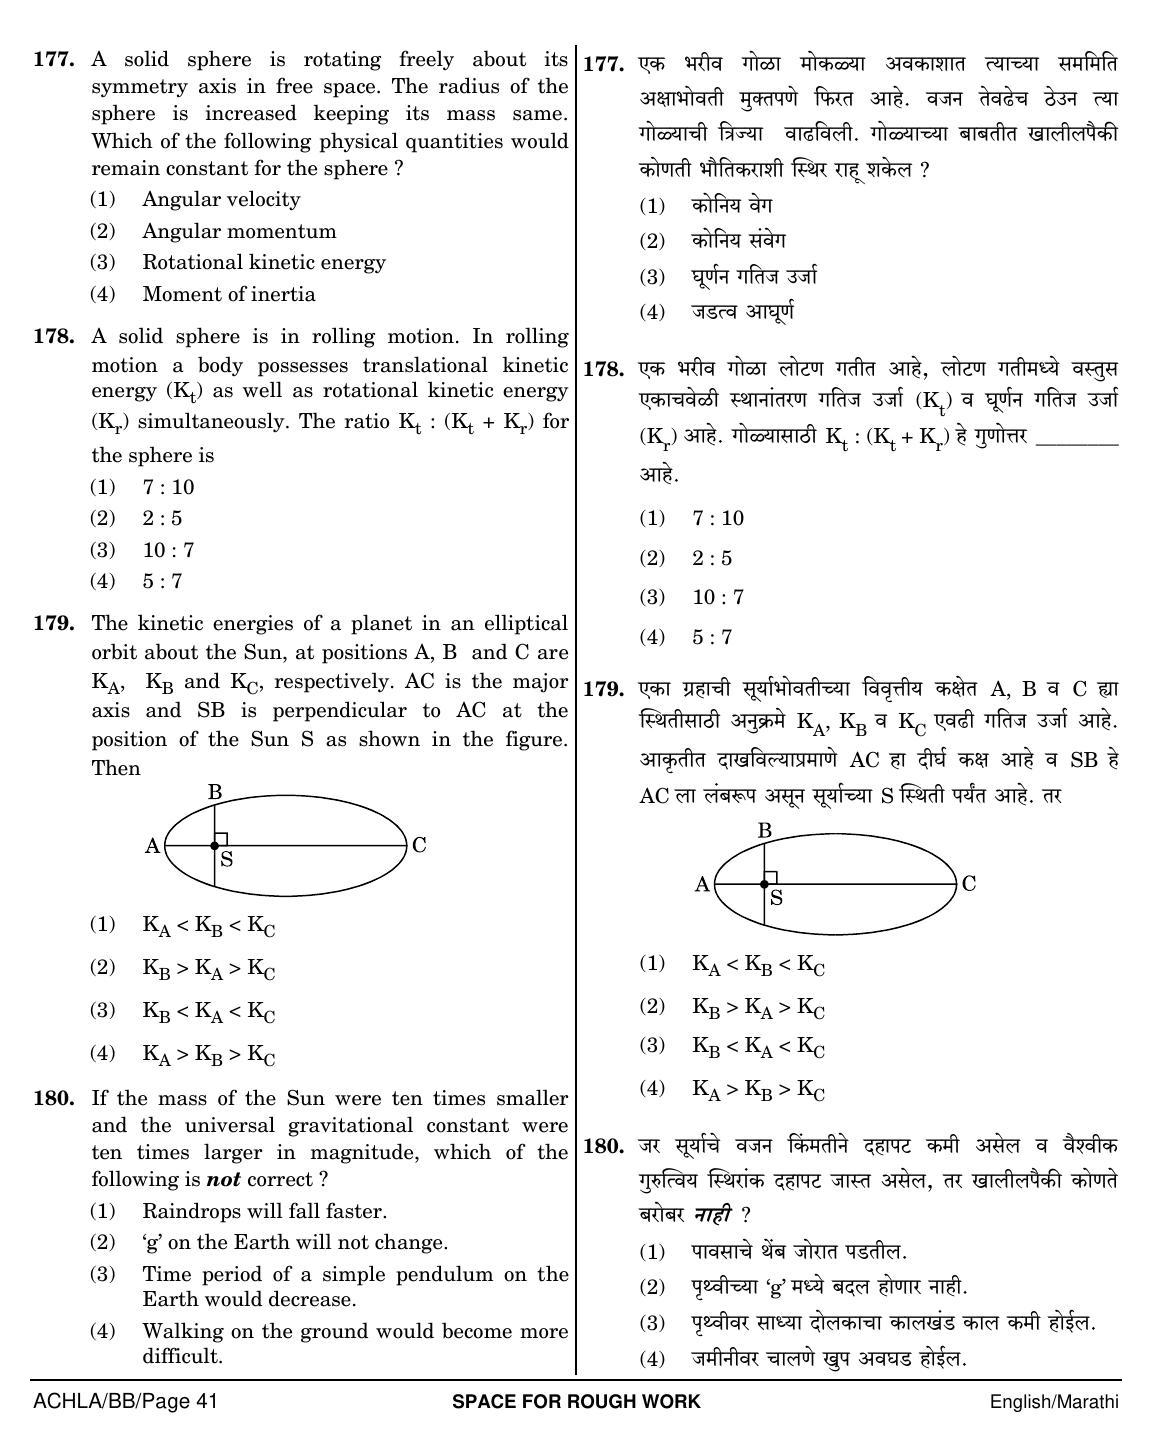 NEET Marathi BB 2018 Question Paper - Page 41